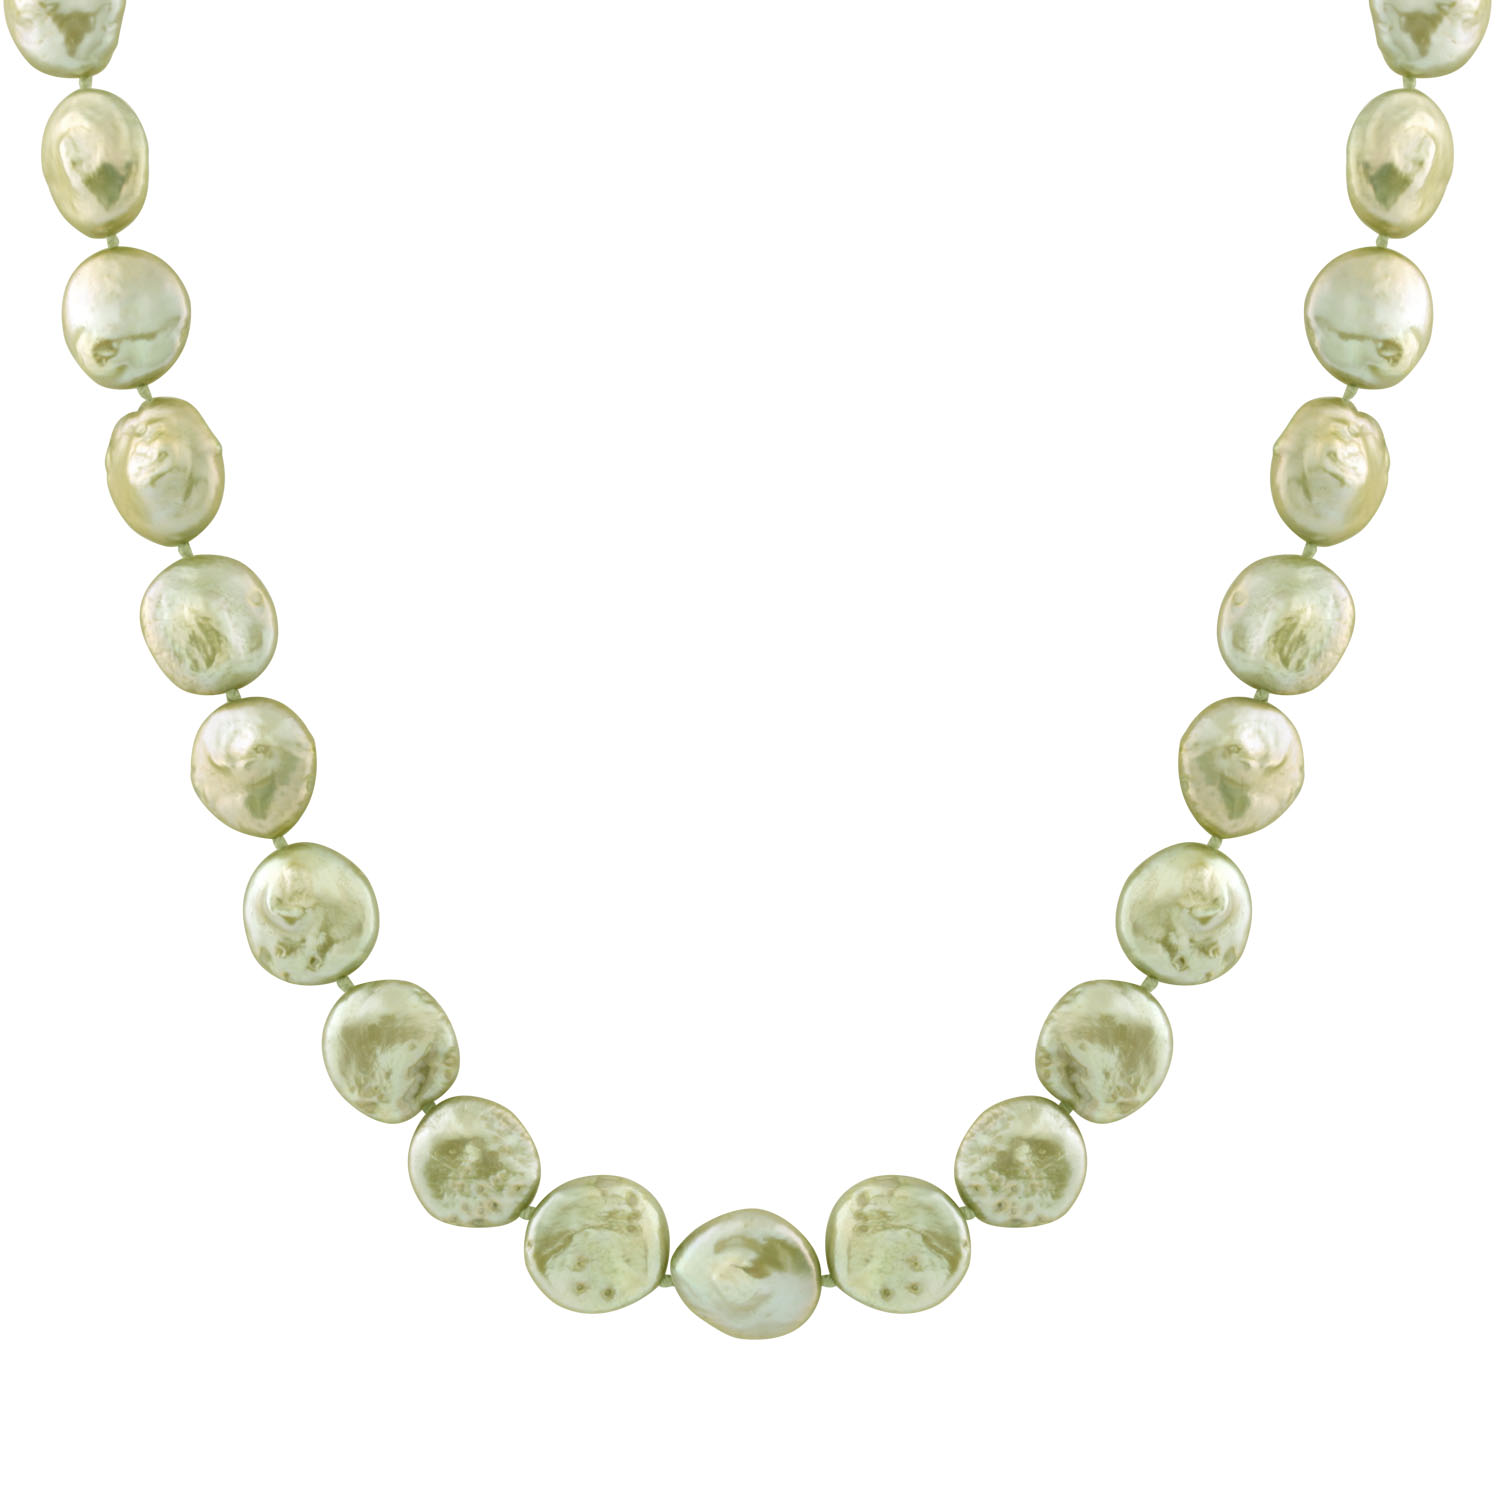 New coin pearl necklace